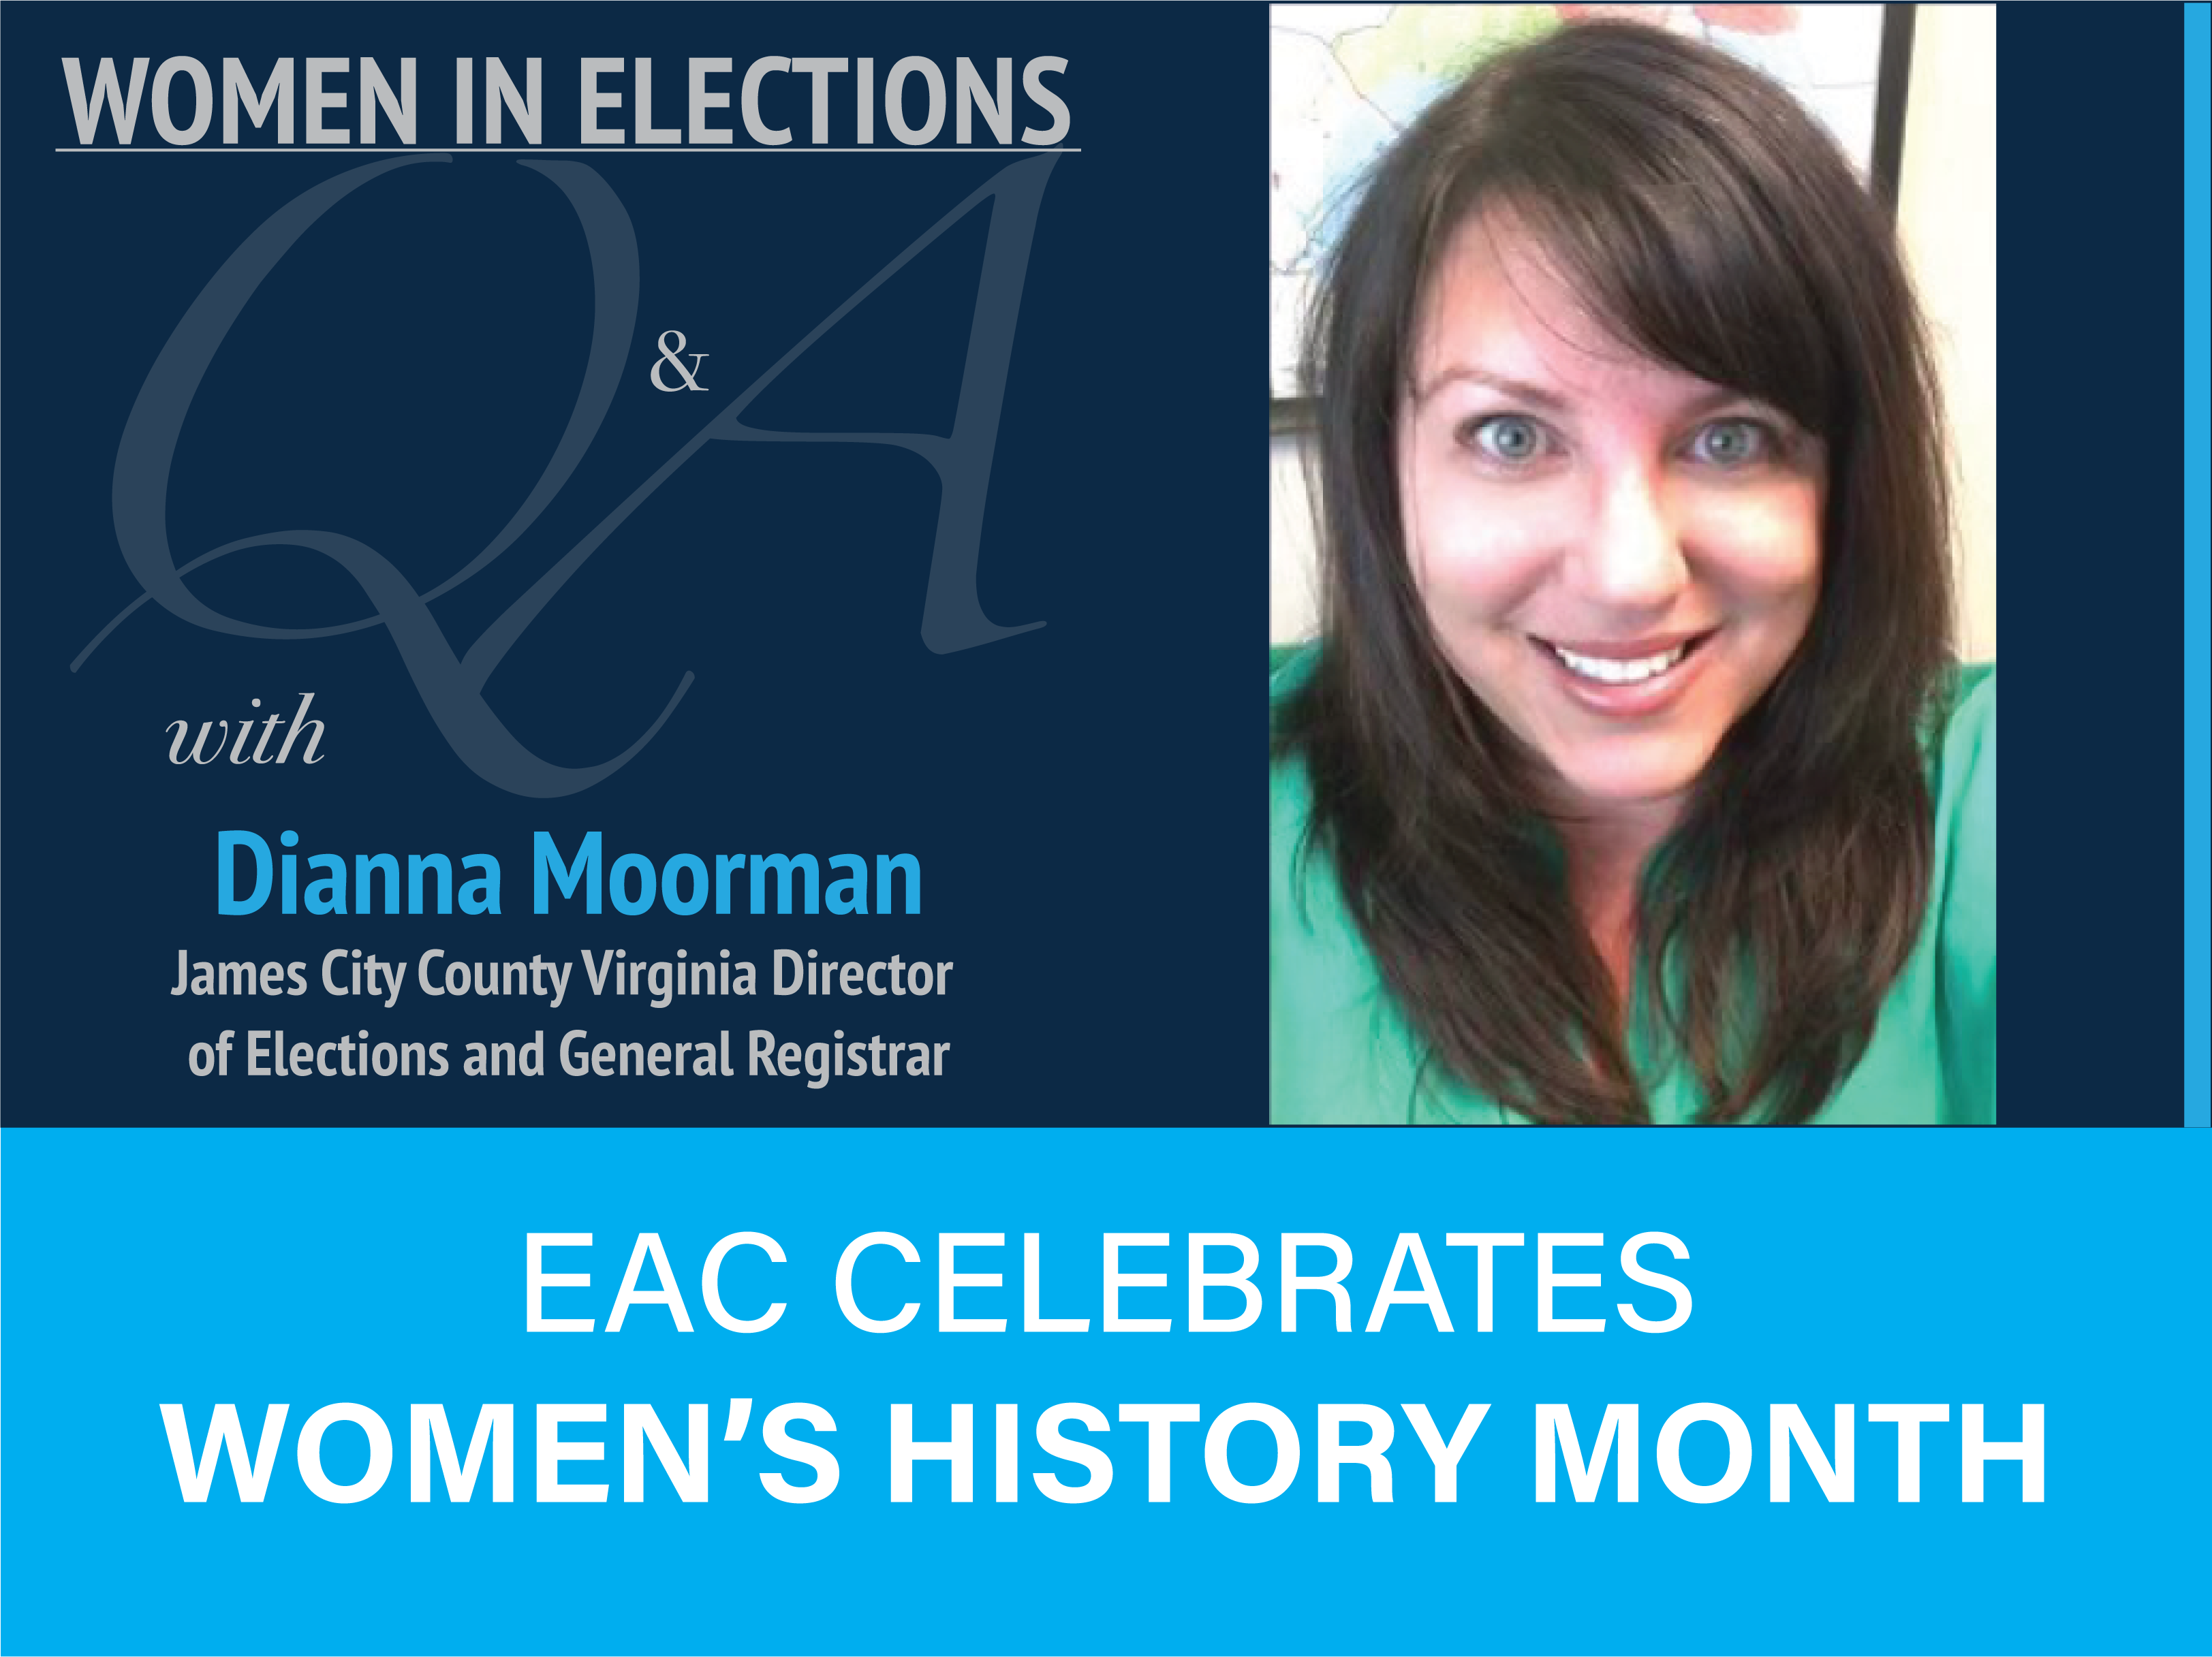 Women in Elections Q and A Series with Dianna Moorman James City County Virginia Director of Elections and General Registrar. EAC Celebrates Women's History Month